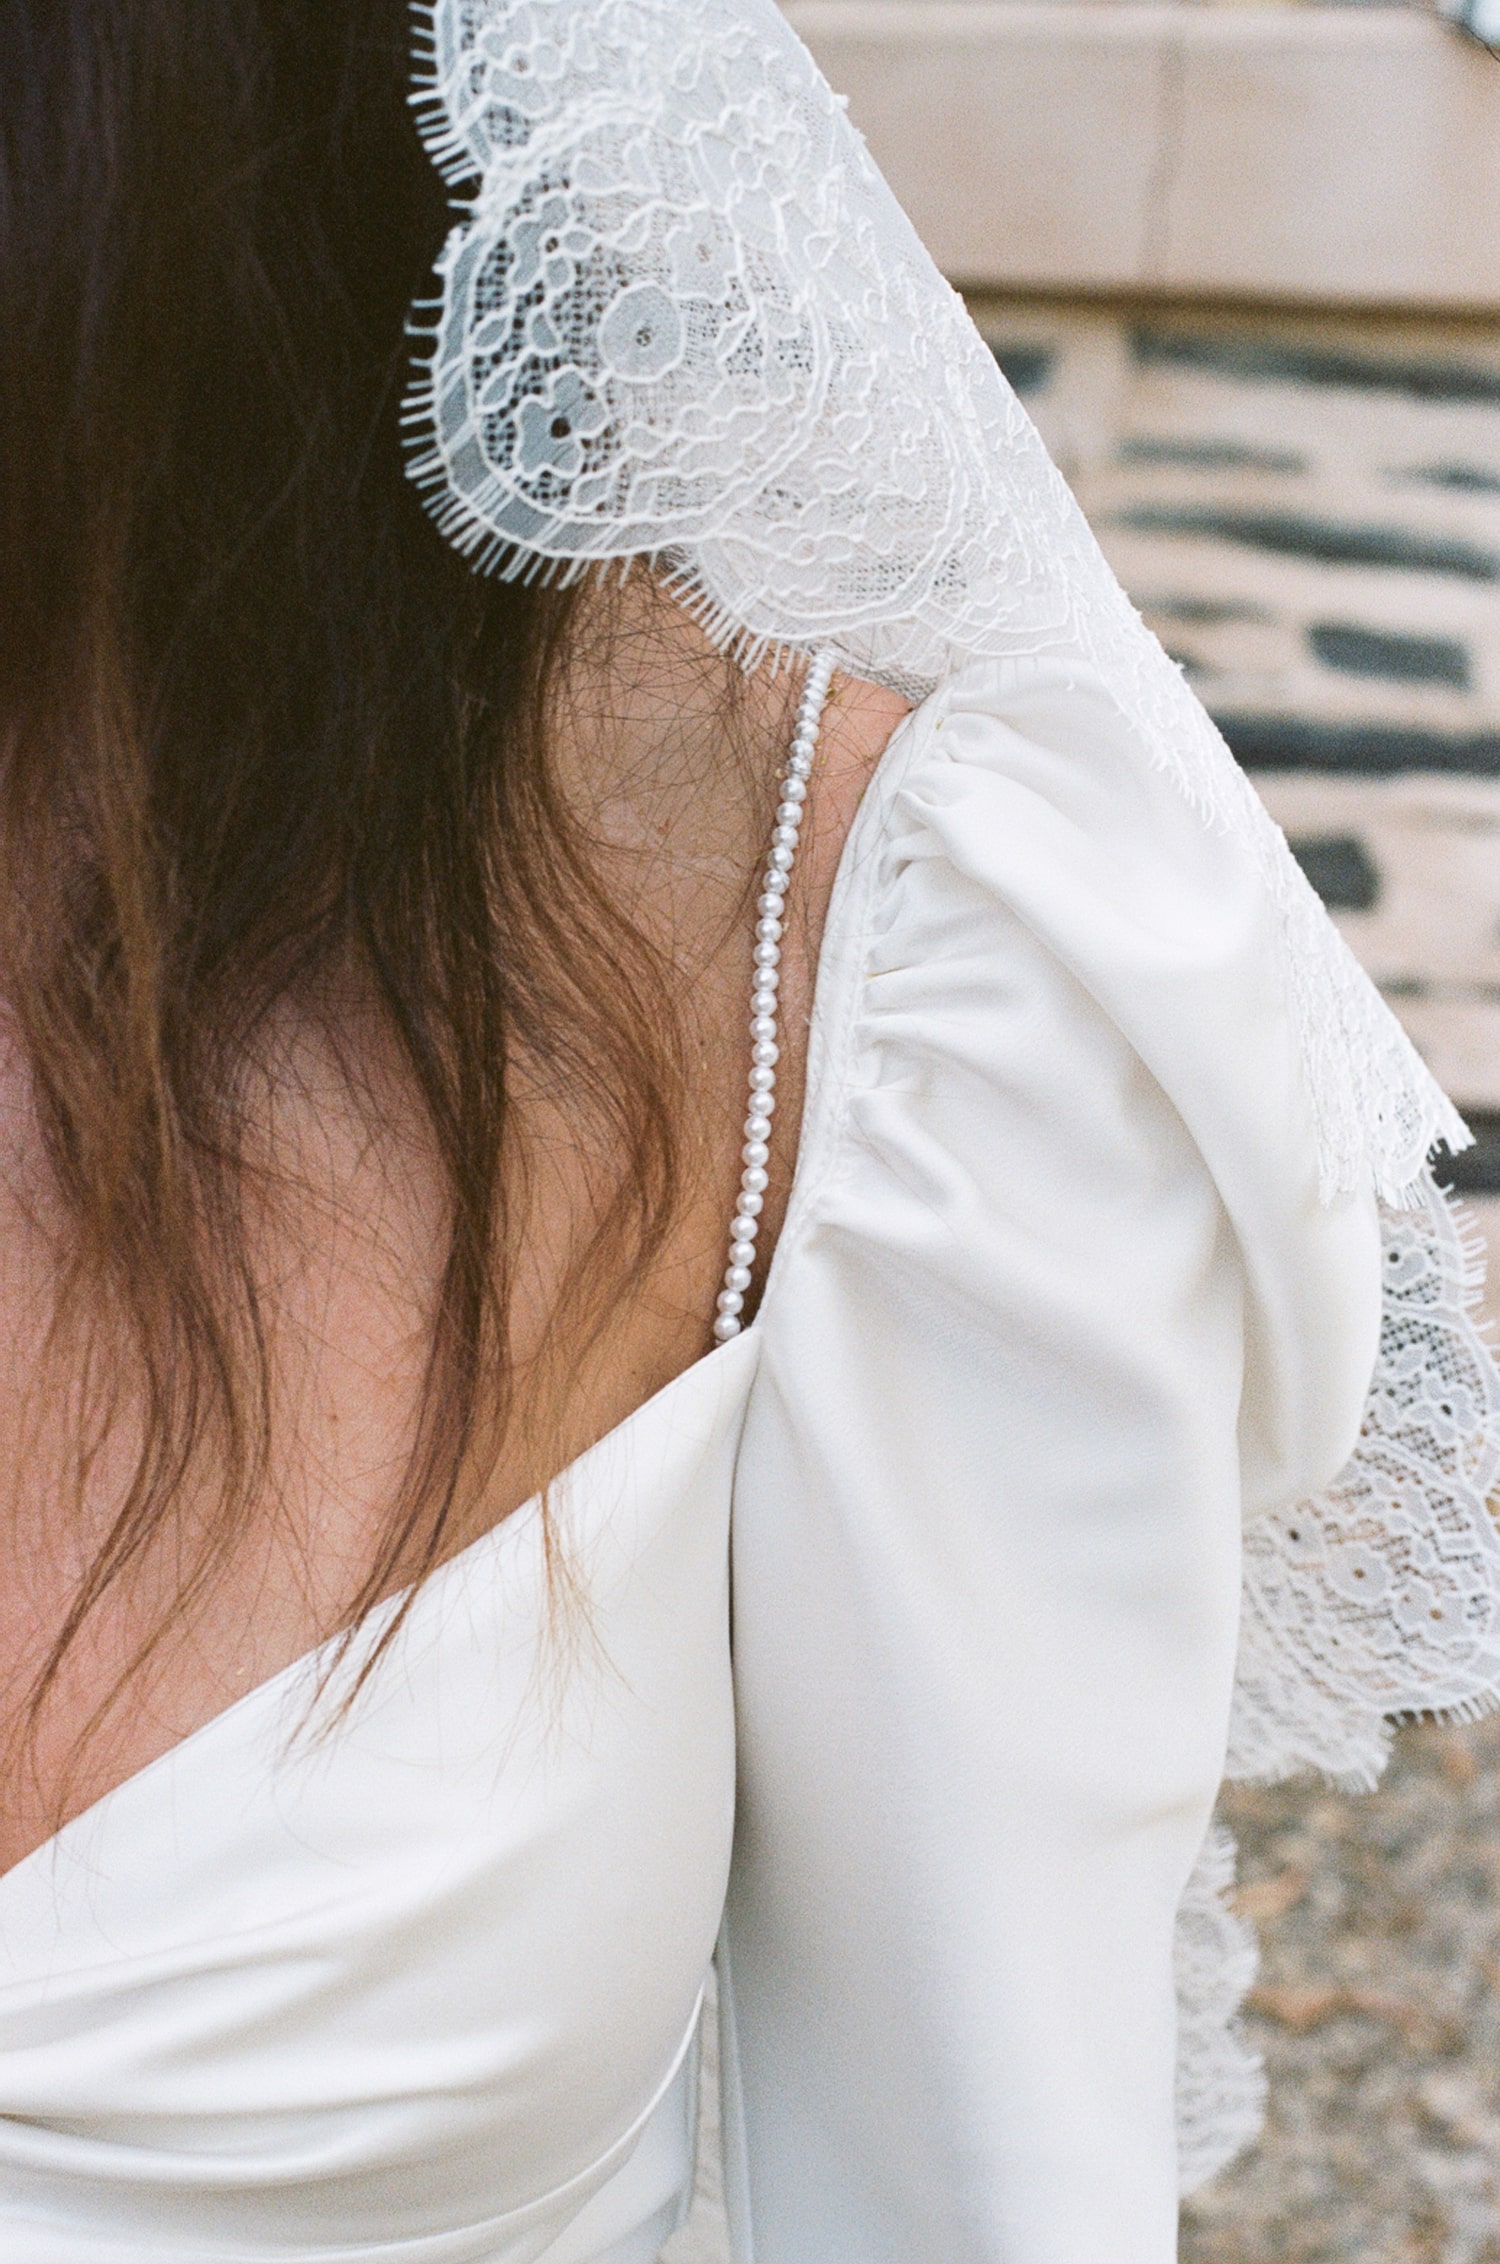 Close up of brides left shoulder and veil. Brides gown has a small pearl strap sitting next to puffed sleeves. The veil is a chantilly lace veil with scallop edging.